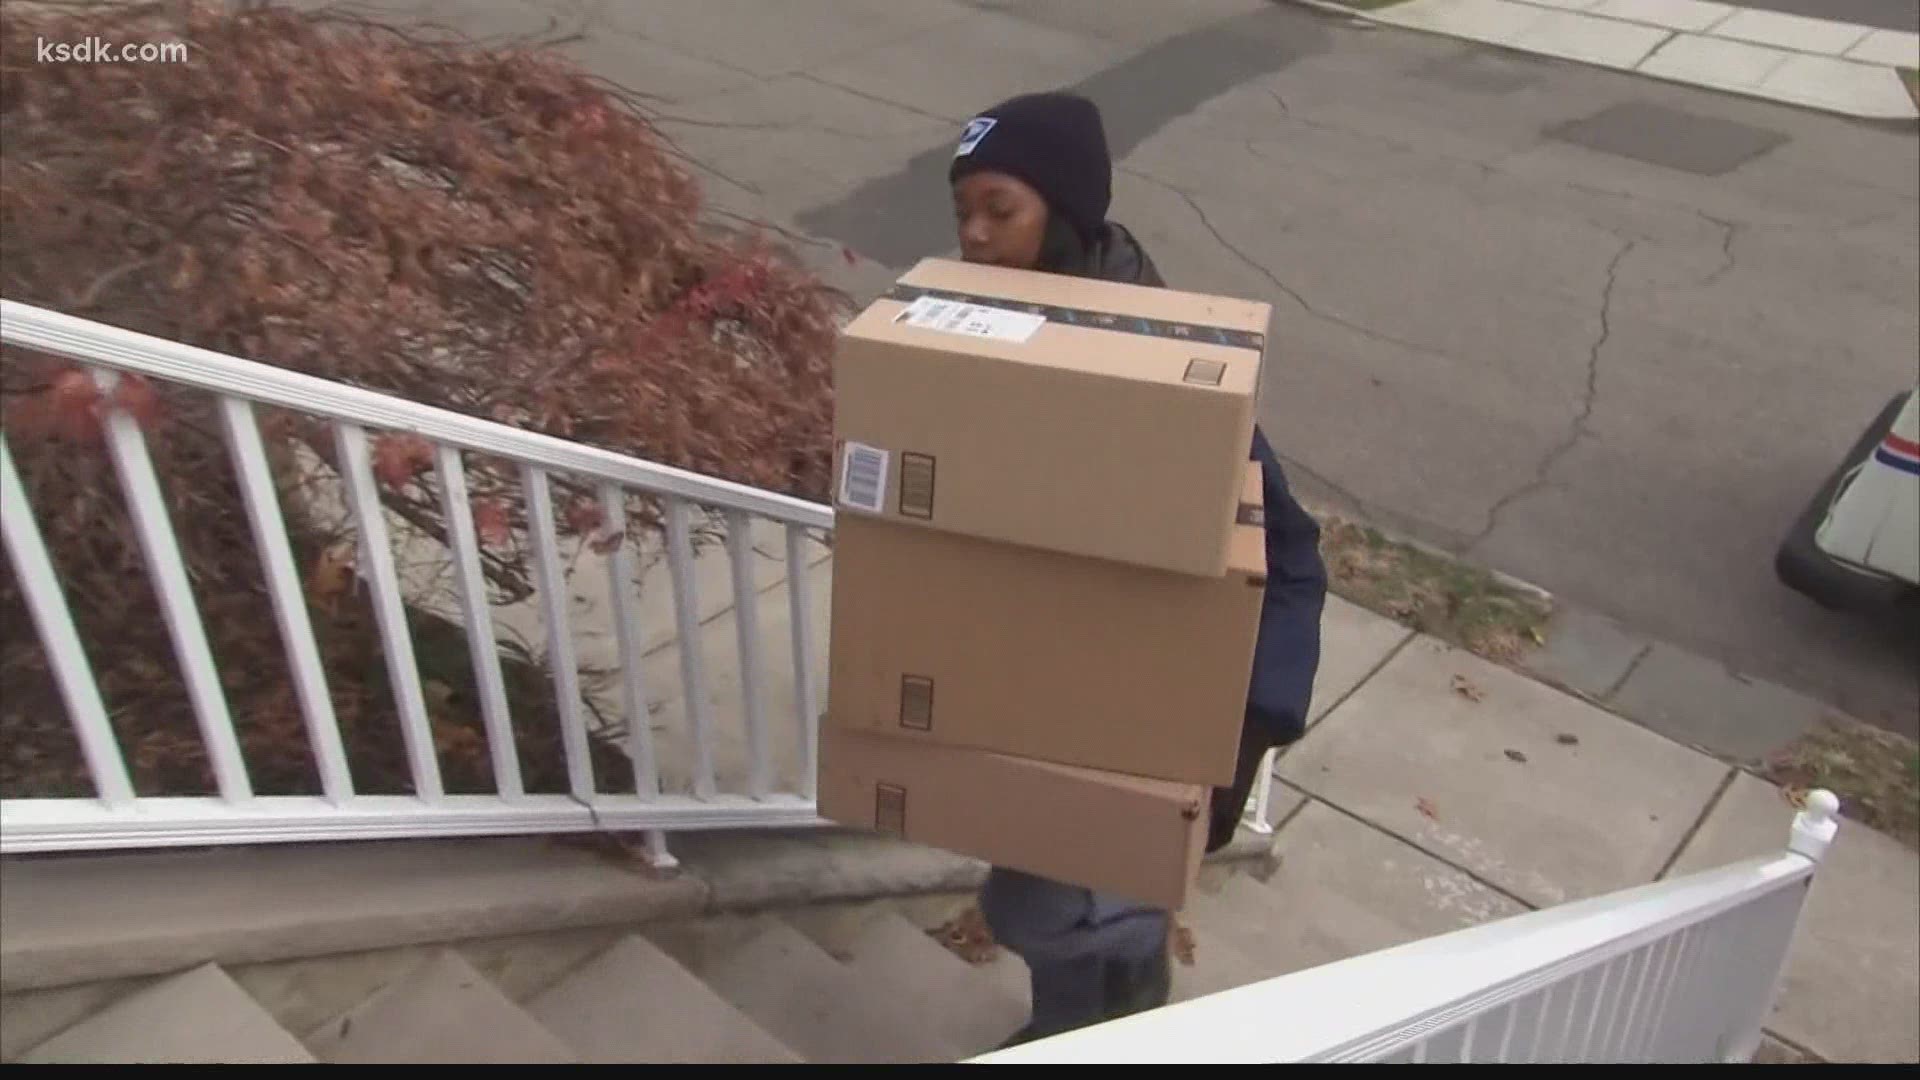 More online shopping means more packages, and that could mean more package theft.